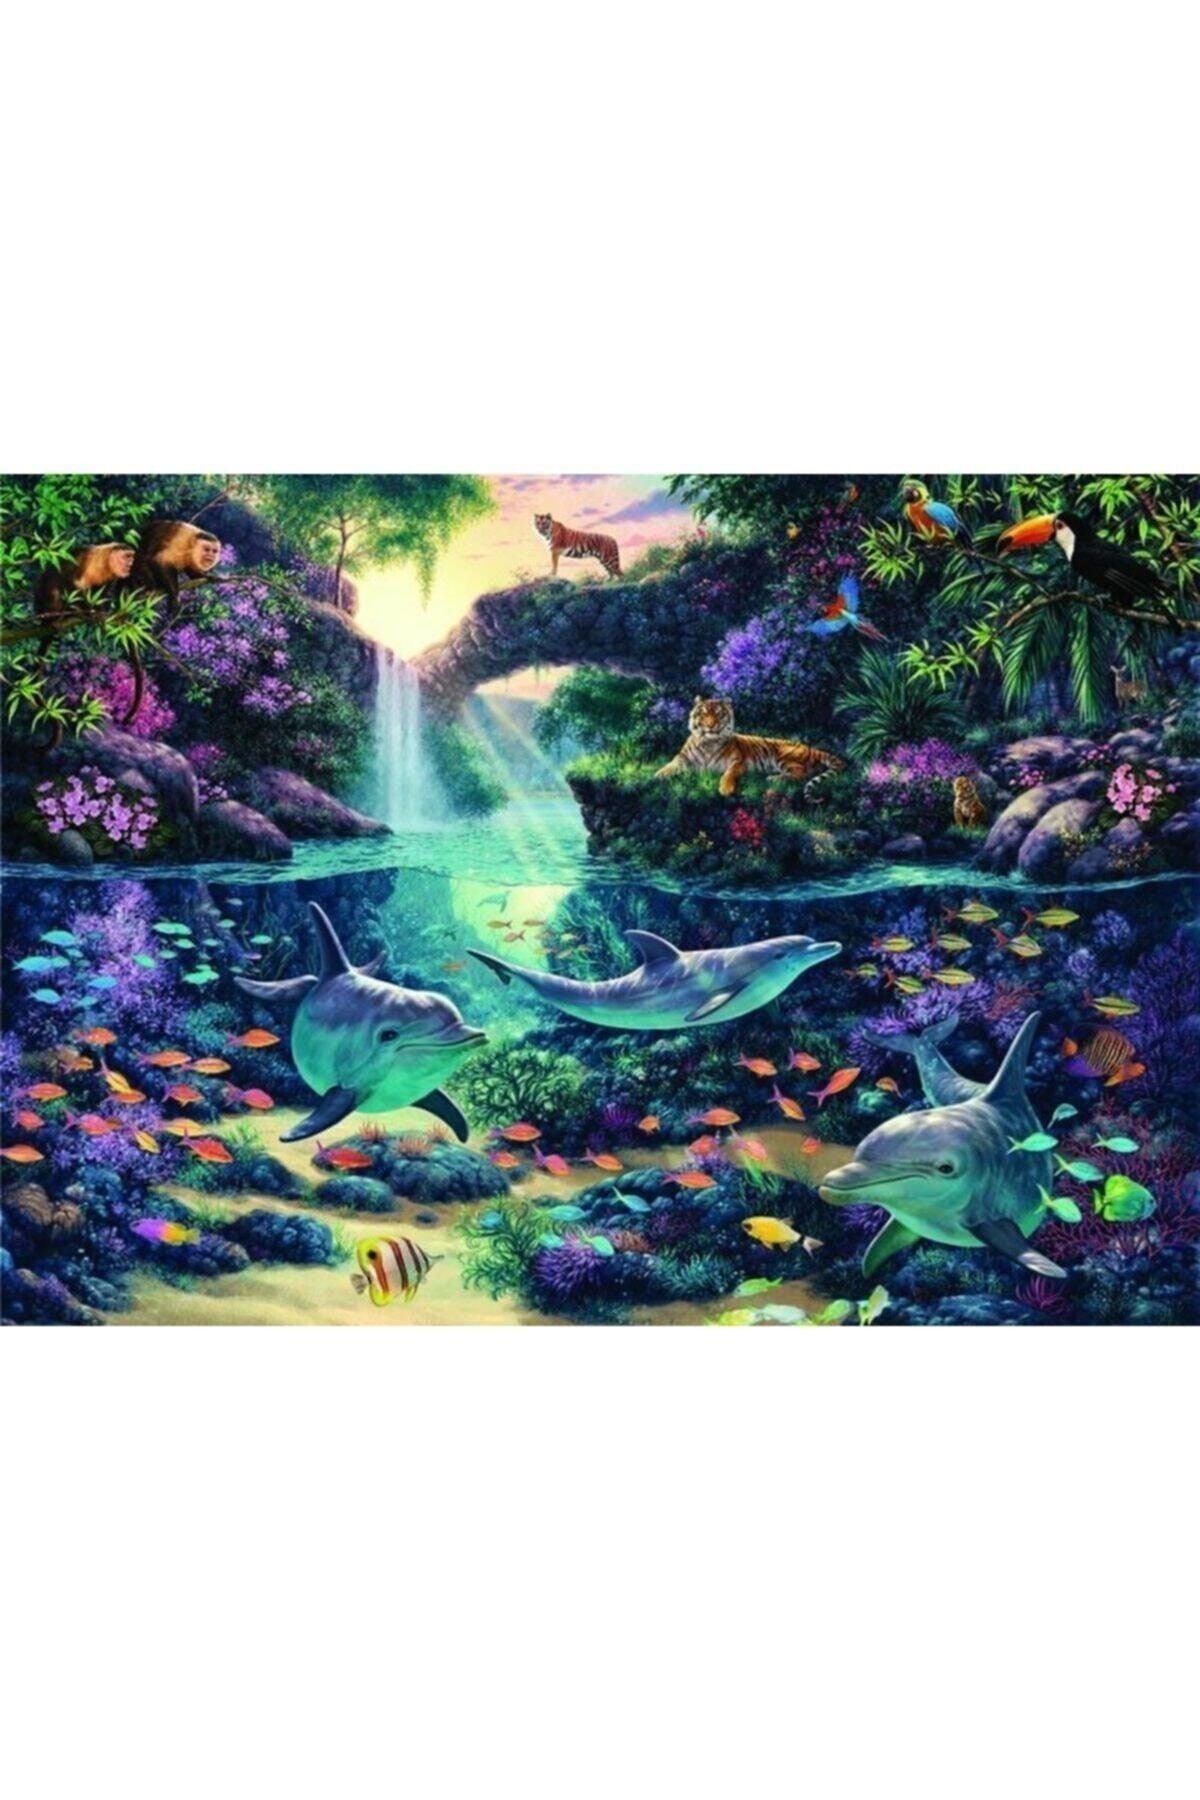 Depth of the Forest / 3000 Piece Puzzle, Code:4908 - Swordslife